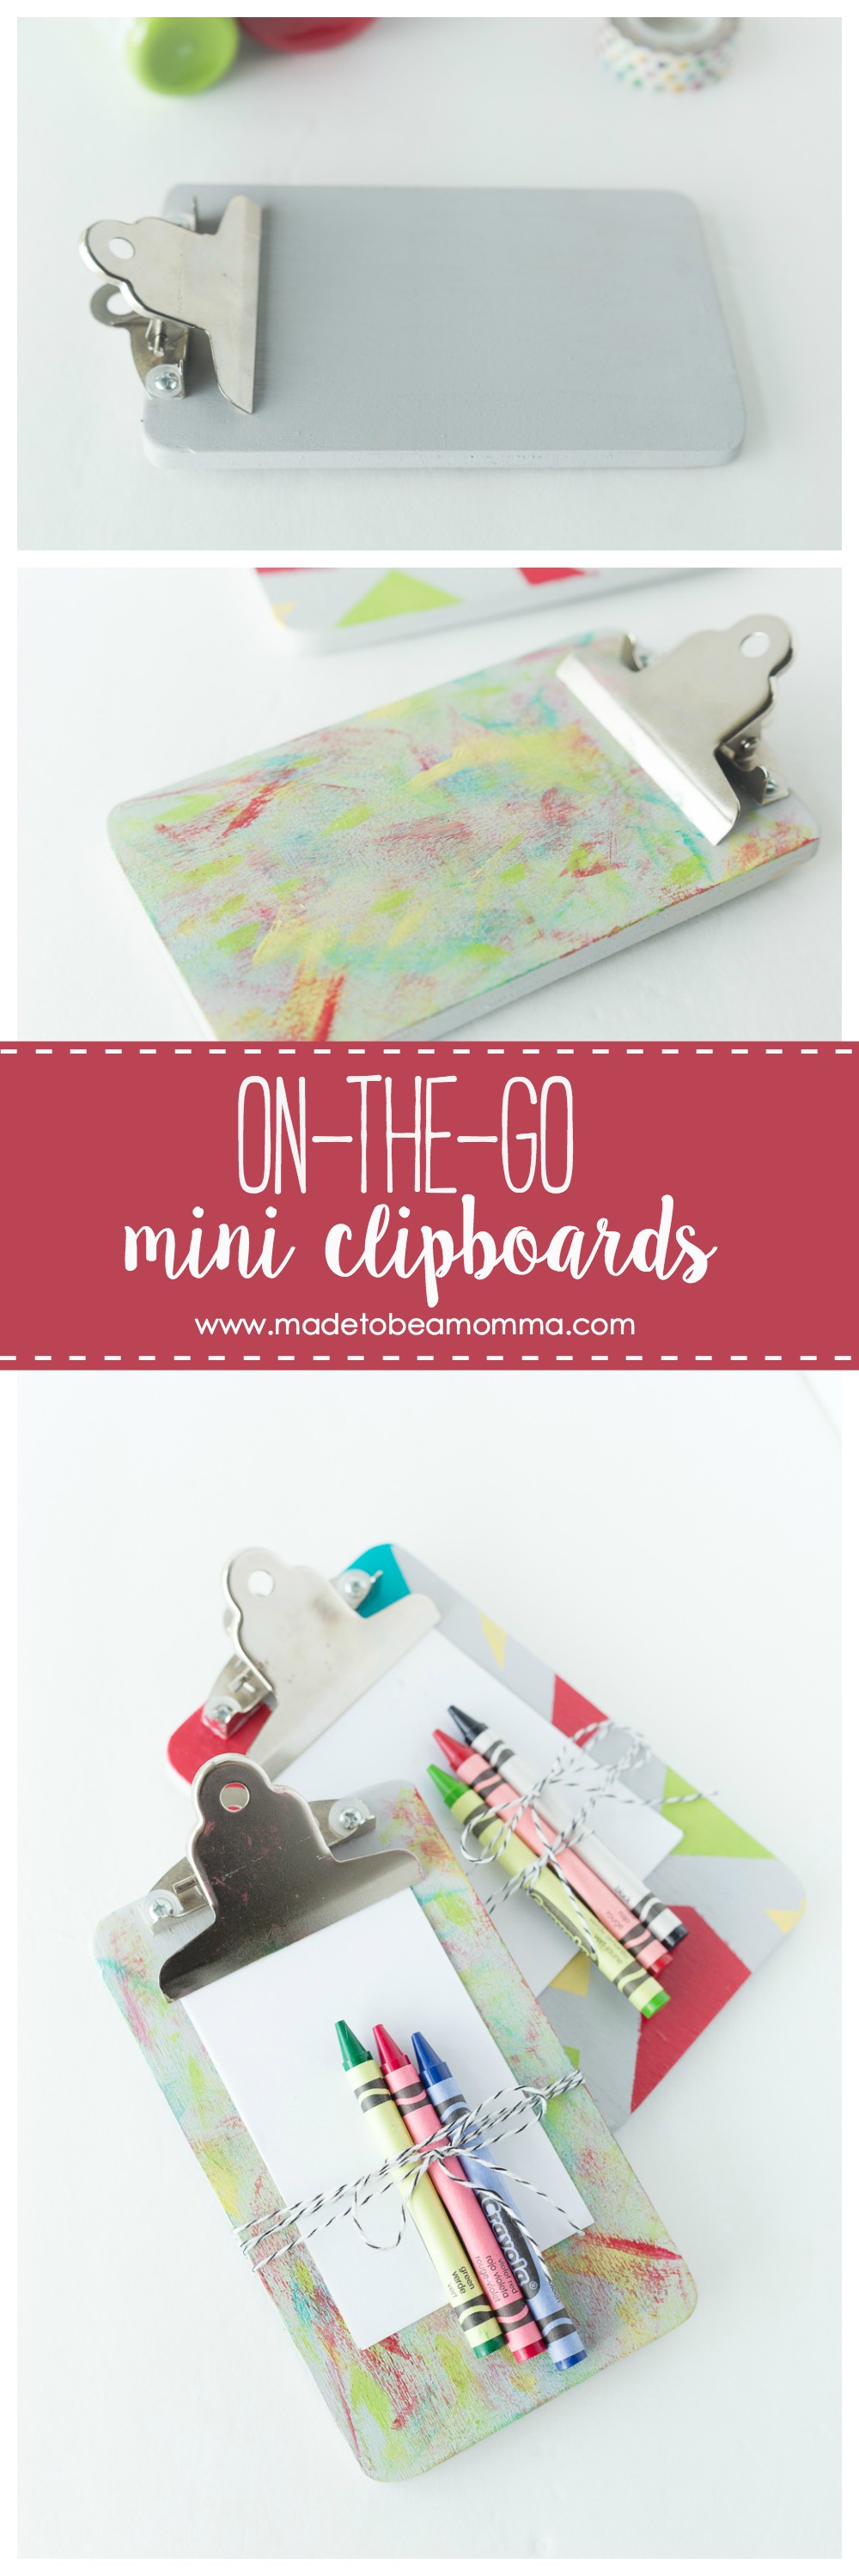 On-the-Go Mini Clipboards: keep your kids busy with their own paper and crayons while on the go. These mini clipboards are perfect for a day full of errands, restaurants and more!